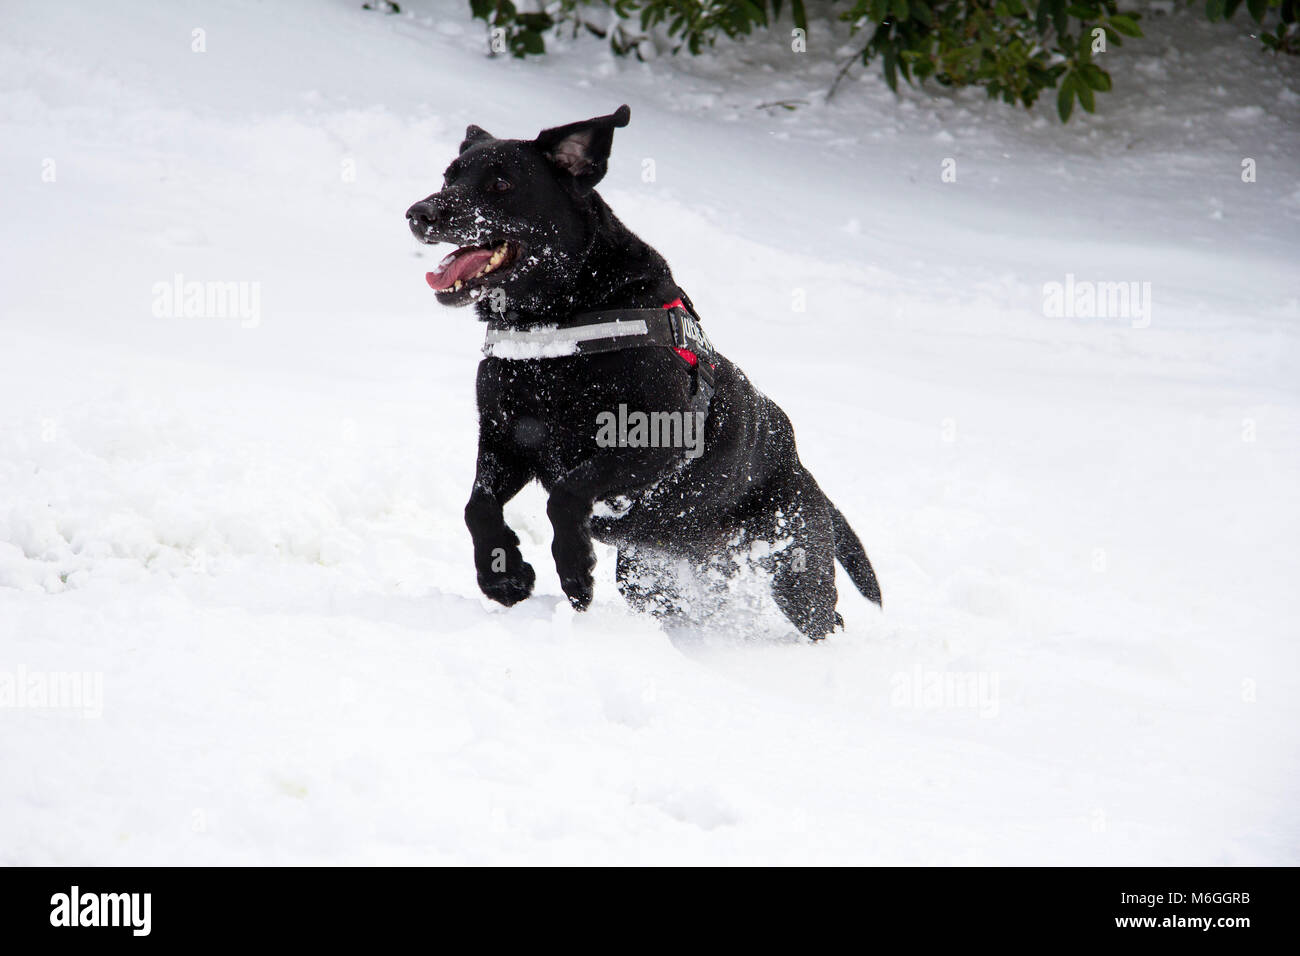 Black Labrador dog running, jumping and playing in the snow from the Beast from the East storm in the grounds of Glasgow University, Glasgow, Scotland Stock Photo